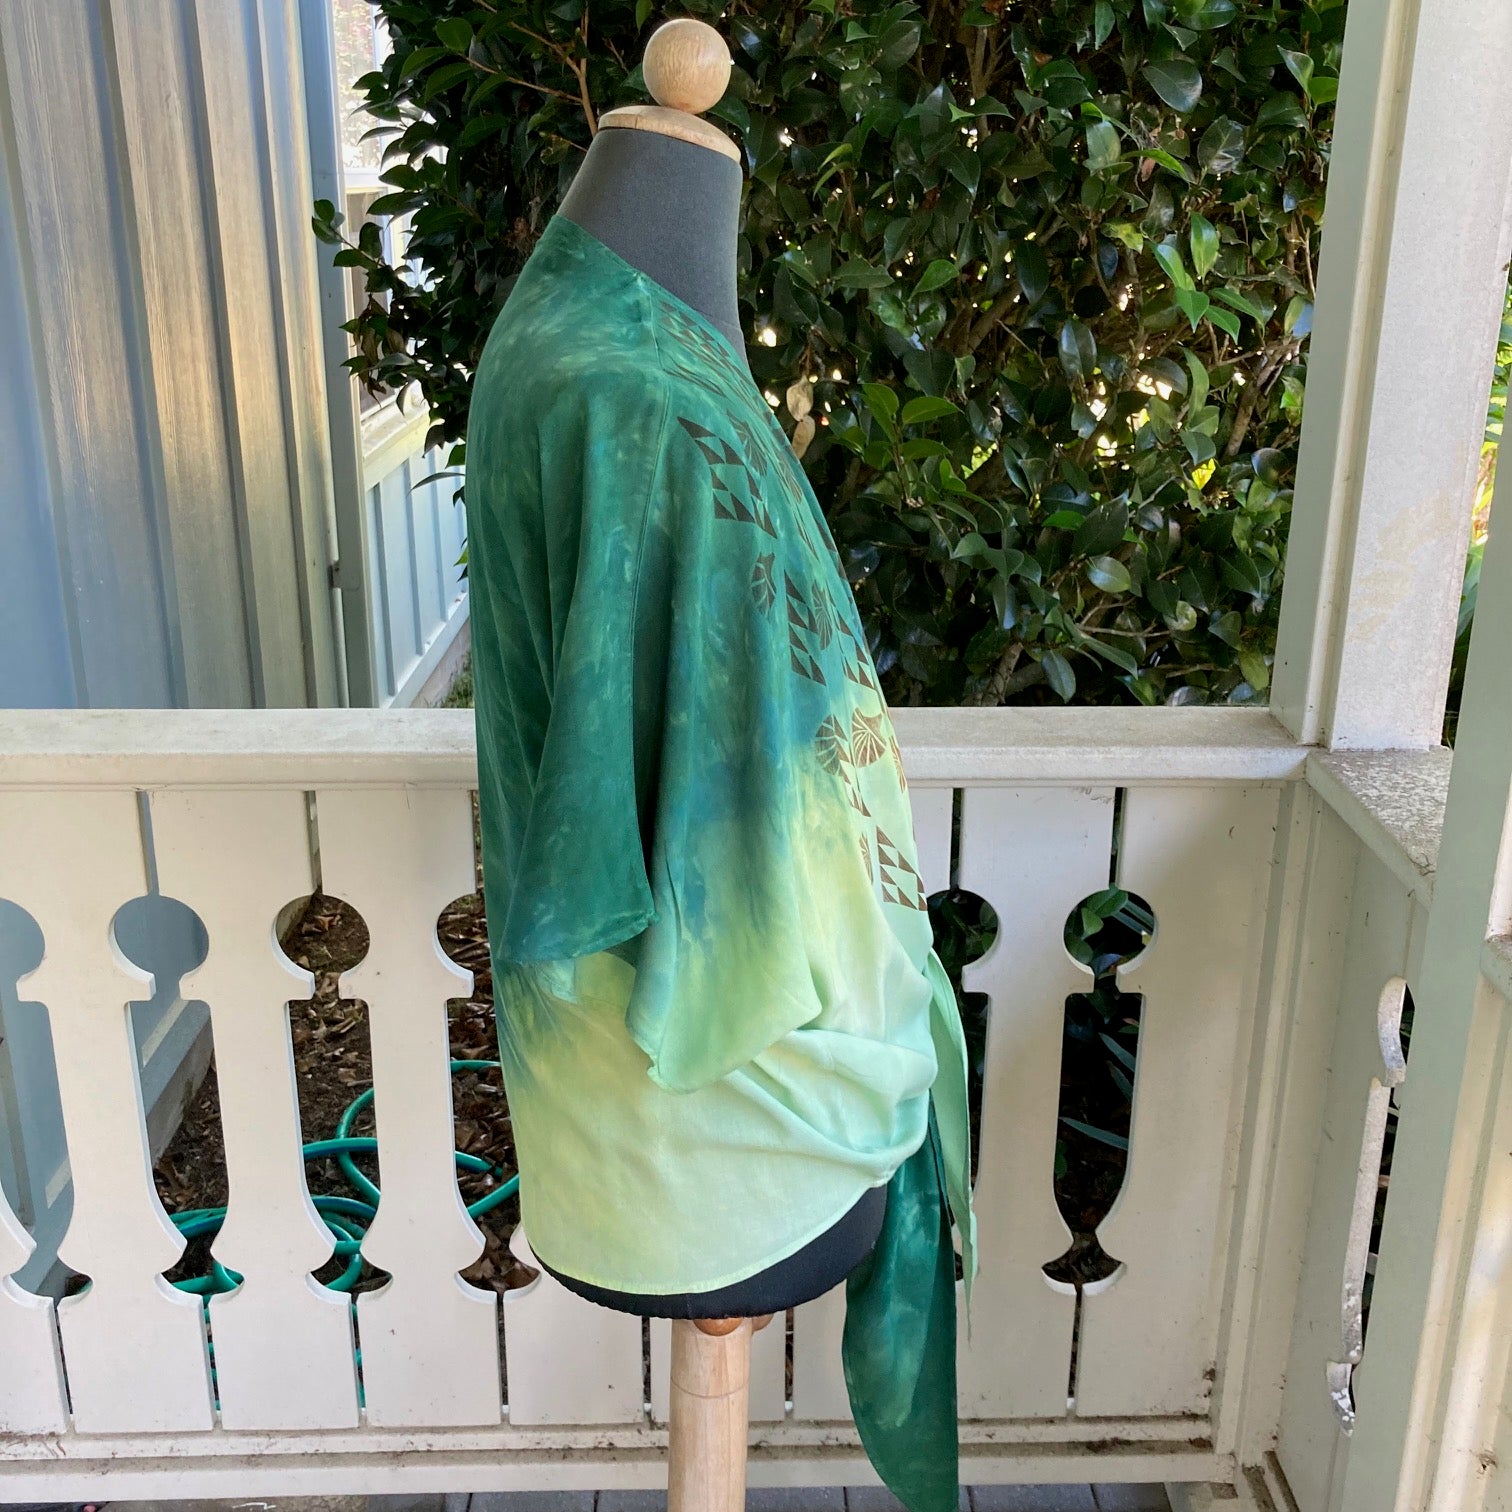 Ohe Kapala TIE Blouse in Green and Yellow with Mauna and Lehua